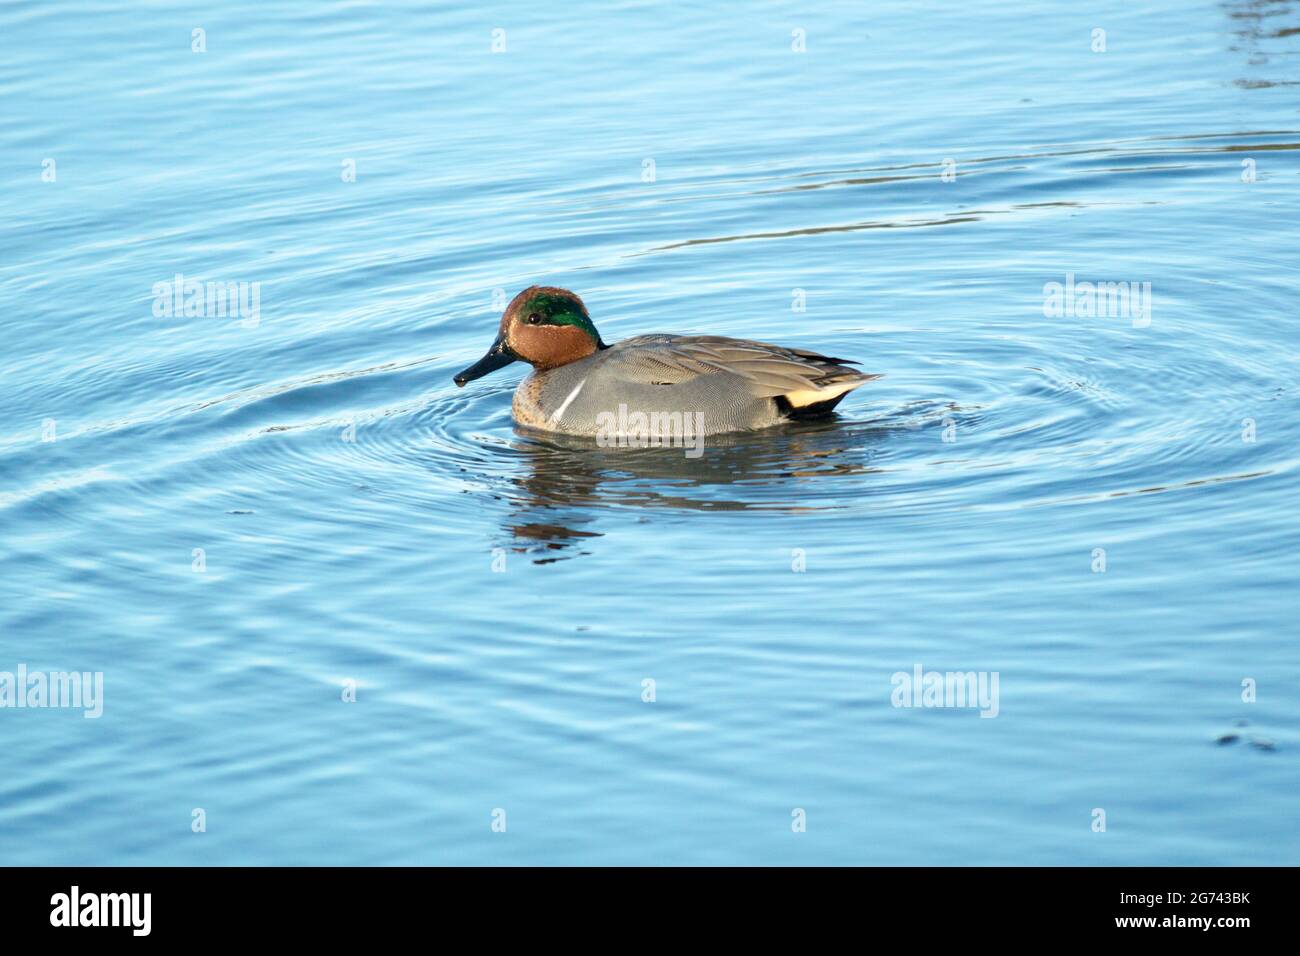 Male Green Winged Teal (Anas crecca) swimming on calm blue water with ripples on the surface. Stock Photo